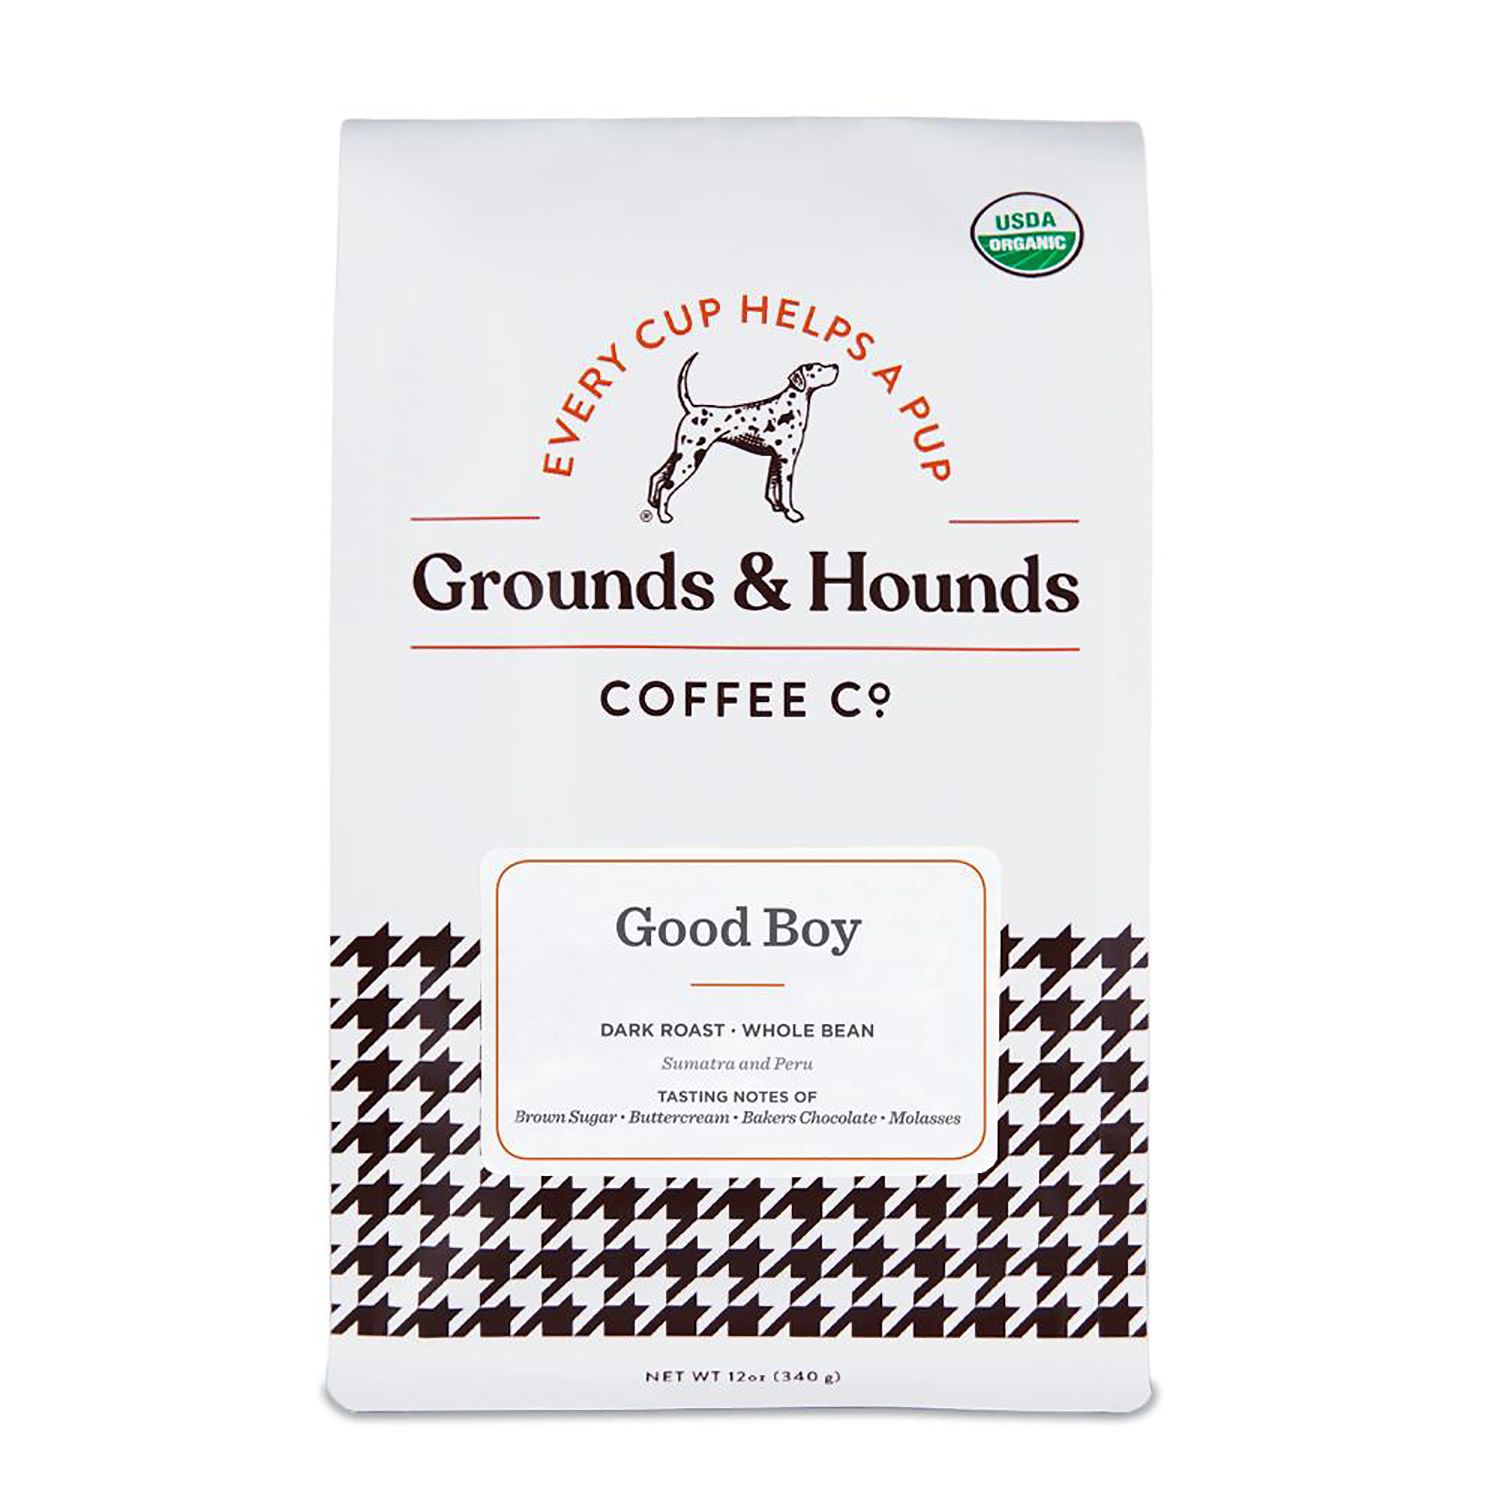 Grounds & Hounds Coffee Co.